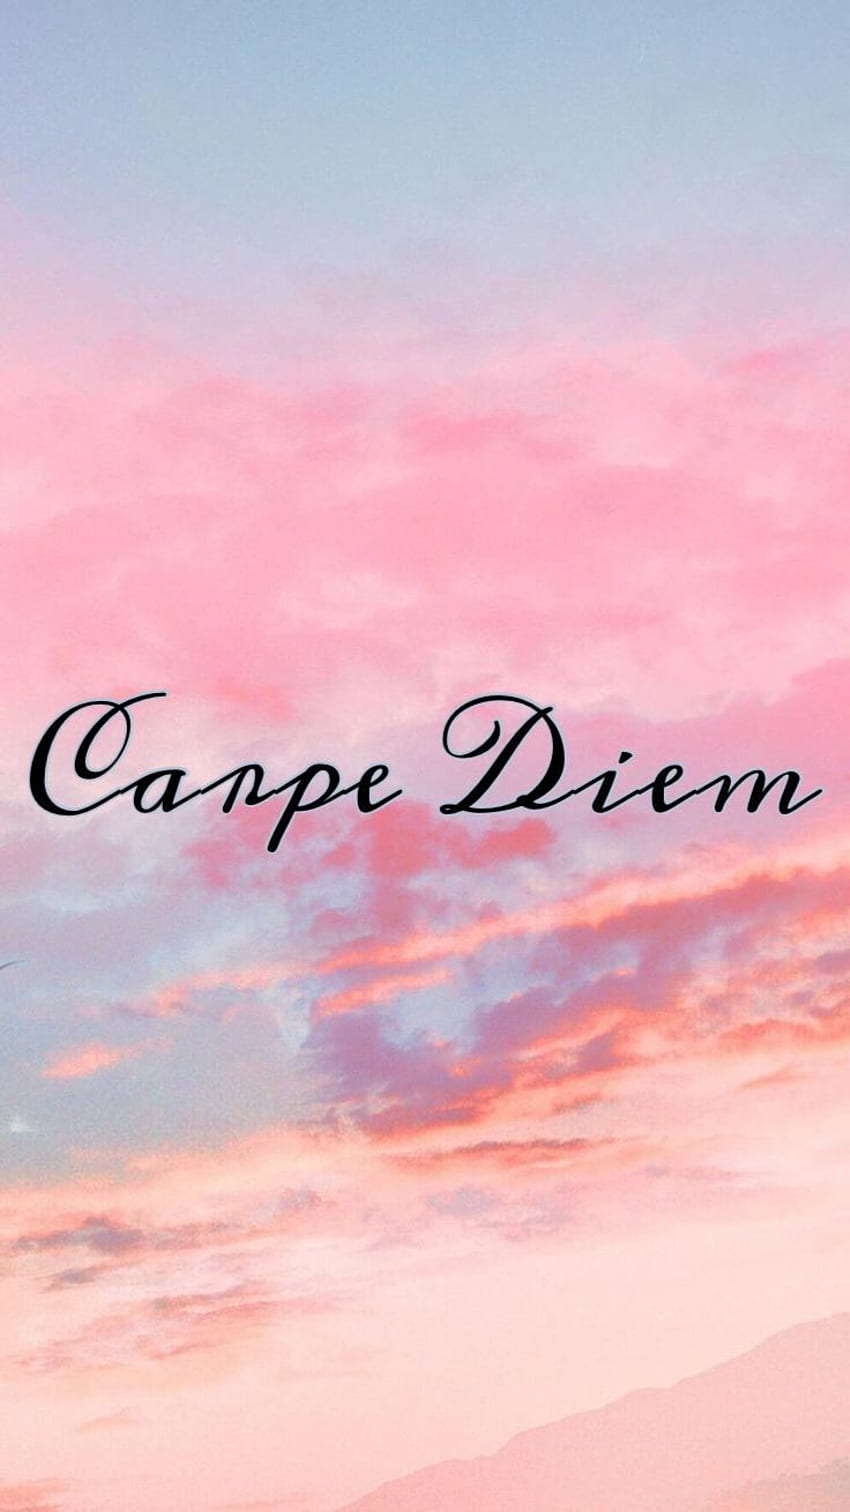 Carpe Diem HD Wallpapers and Backgrounds